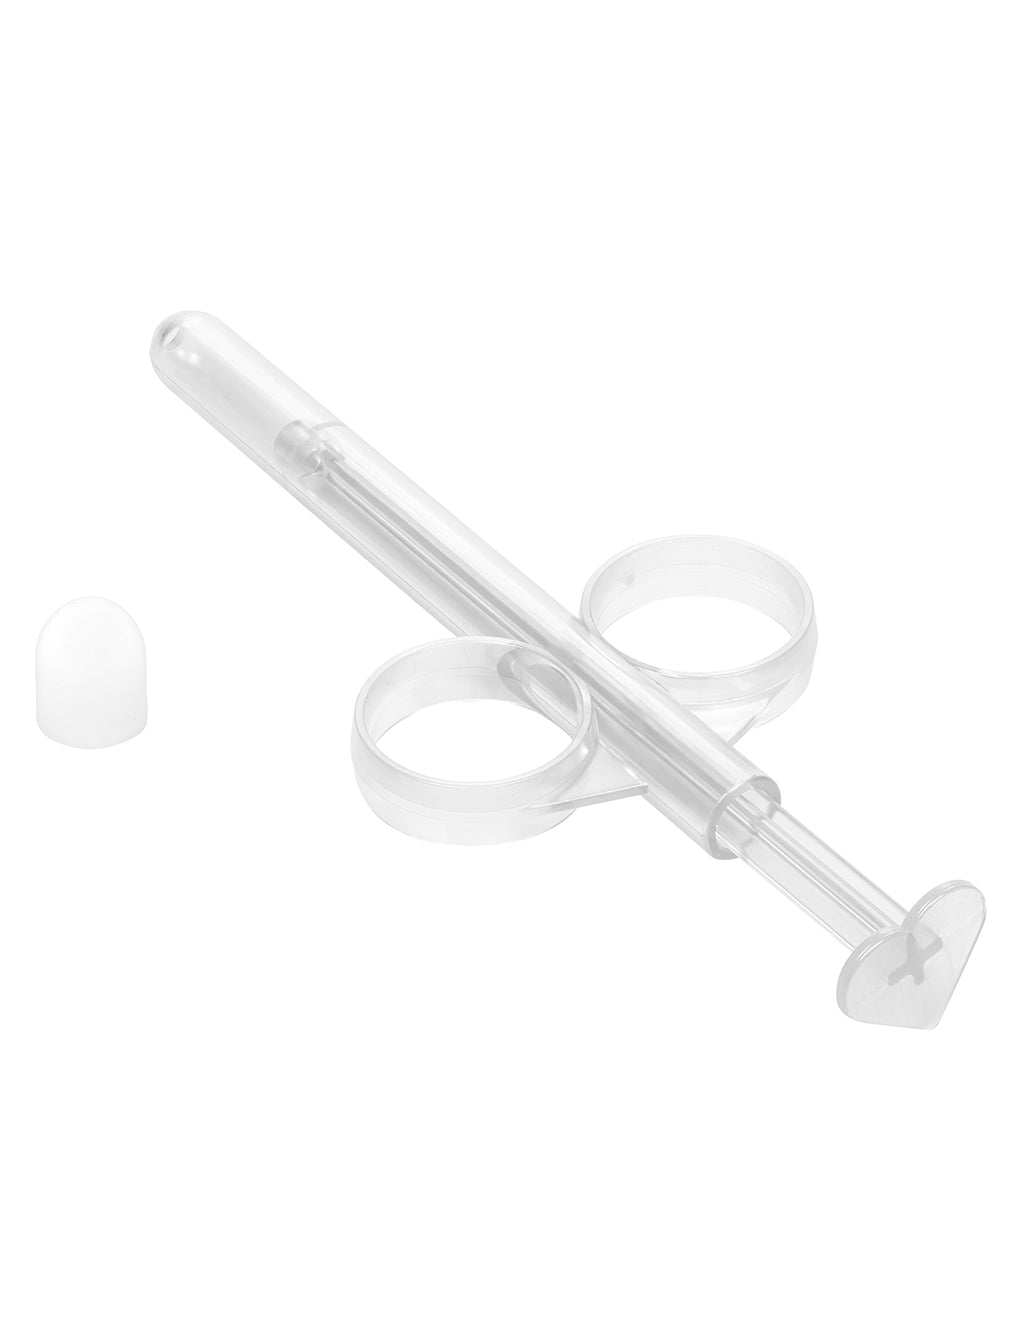 California Exotics Lube Tube Lubricant Applicator- Clear- Front- Bottom